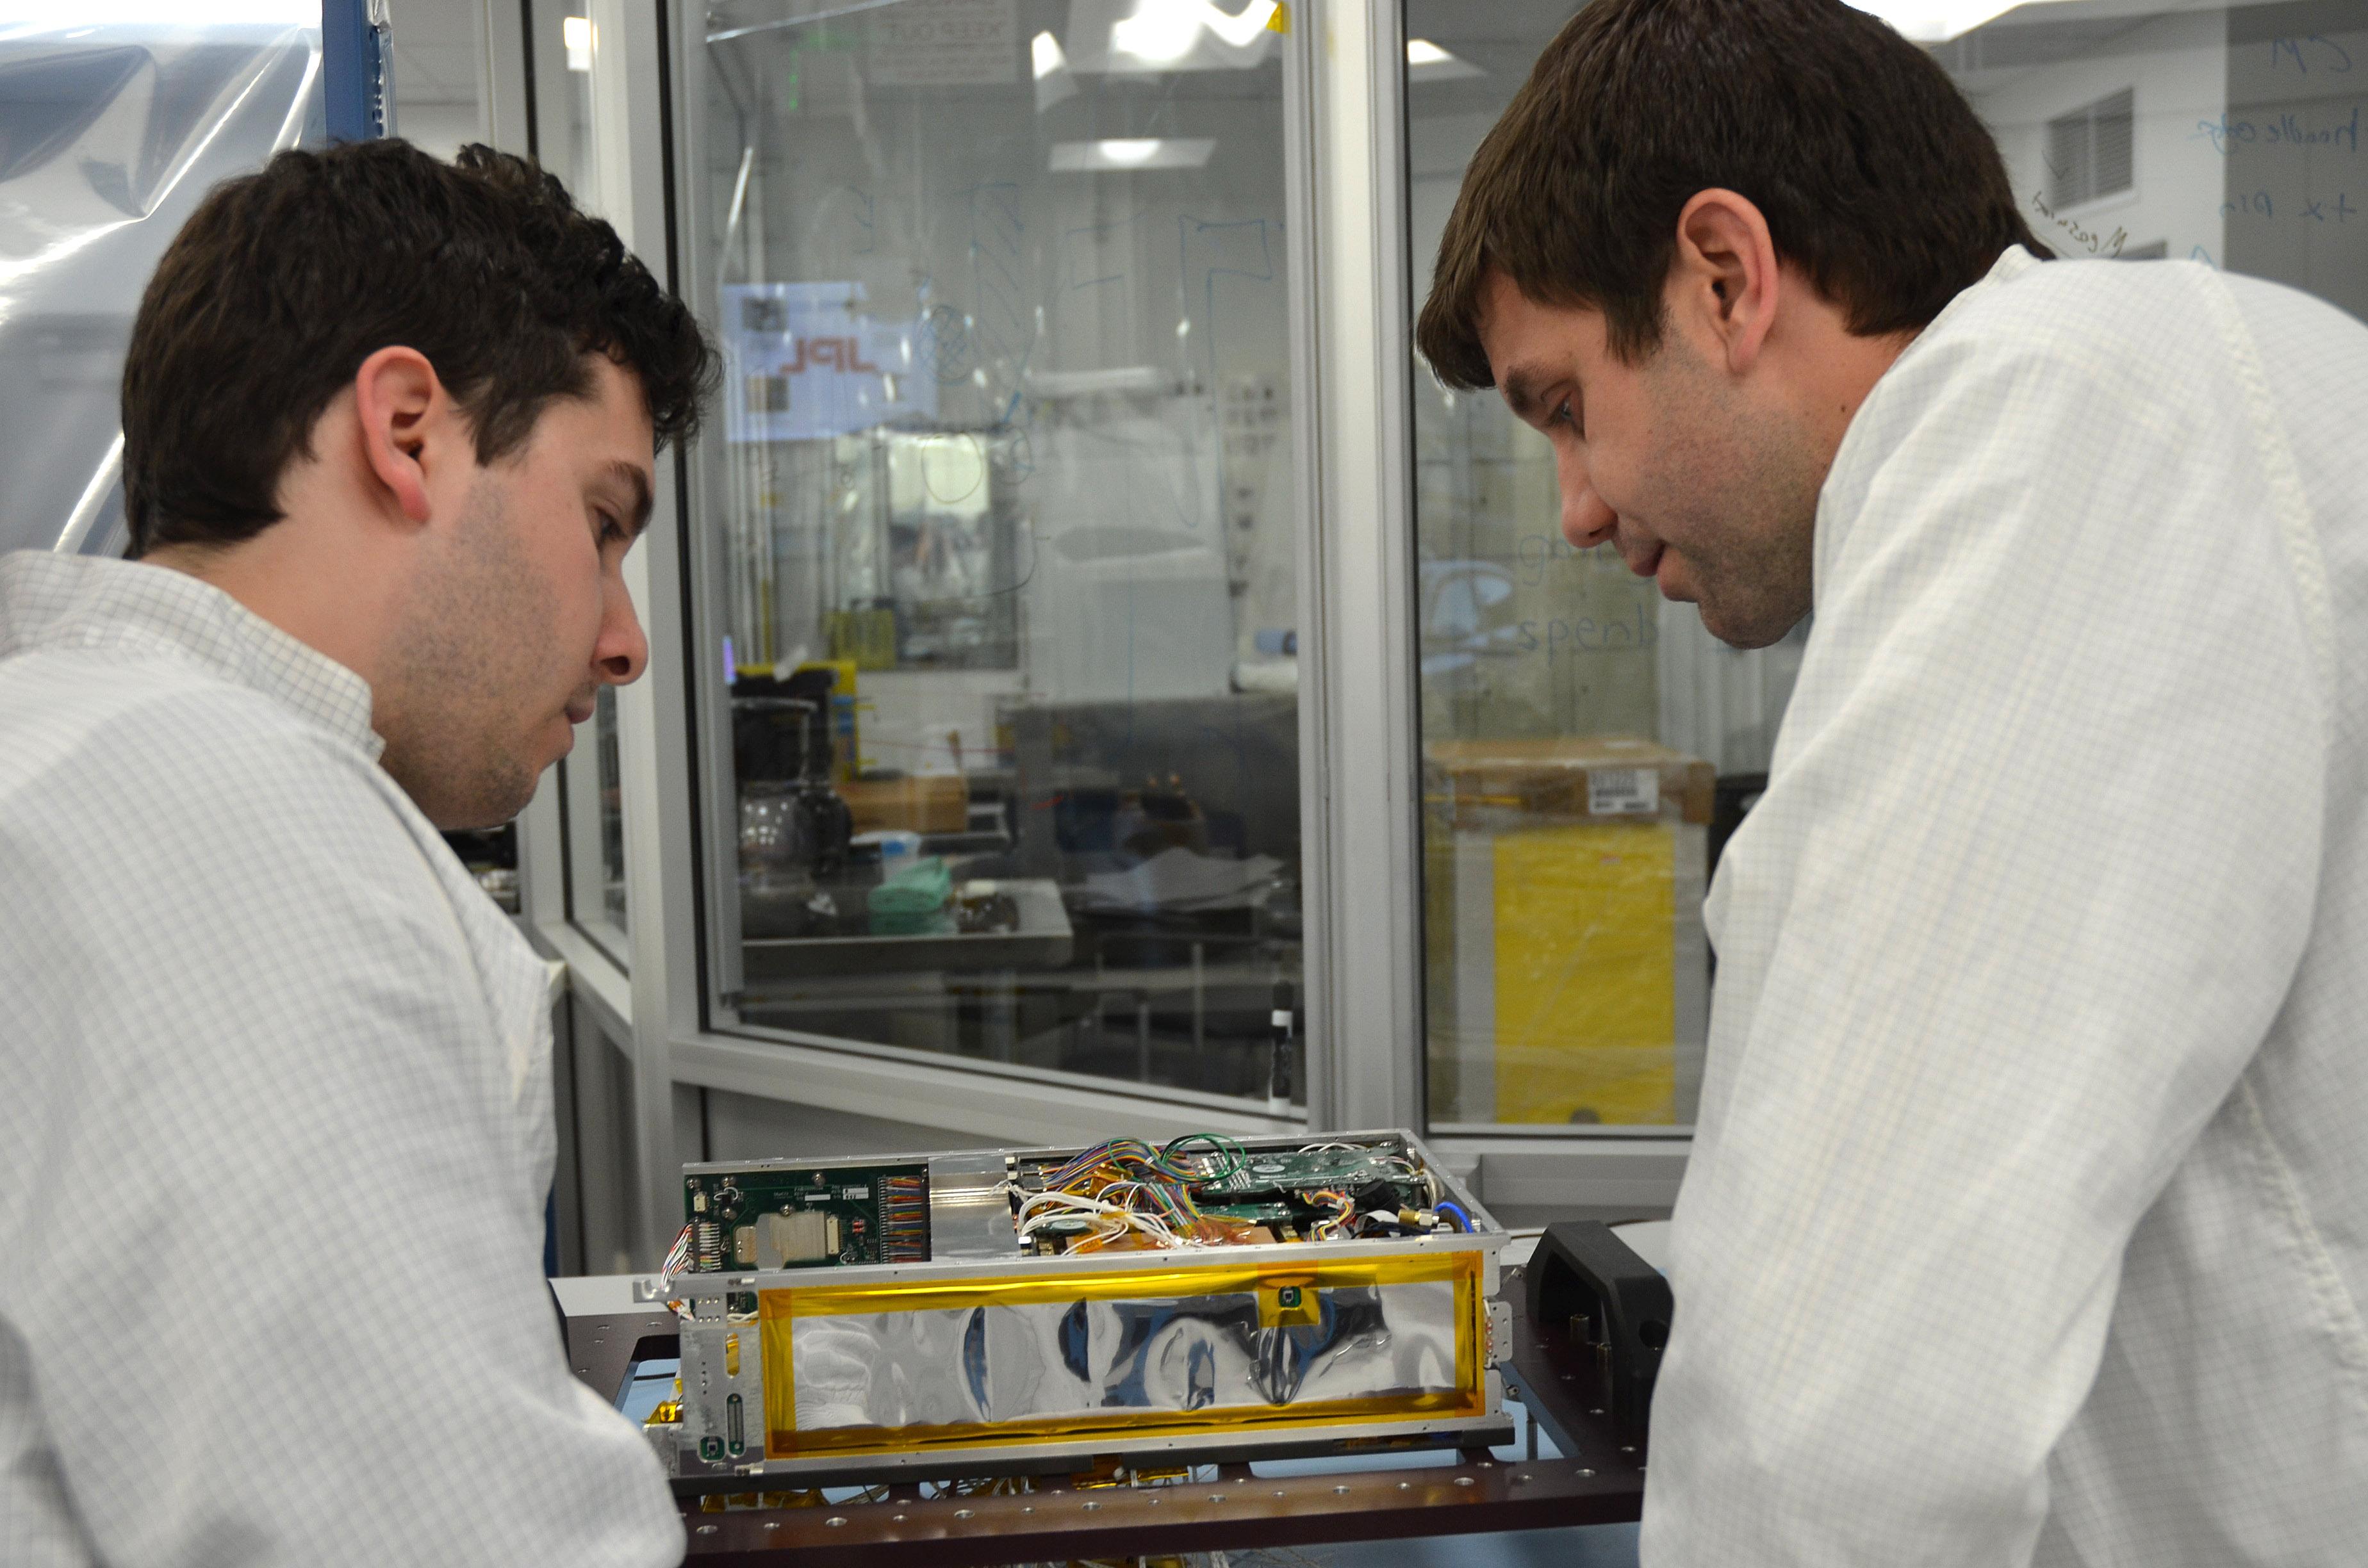 Engineers for NASA's MarCO (Mars Cube One) technology demonstration inspect one of the two MarCO CubeSats. Cody Colley, MarCO integration and test deputy, left, and Andy Klesh, MarCO chief engineer, are on the team at NASA's Jet Propulsion Laboratory, Pasadena, California, preparing twin MarCO CubeSats.